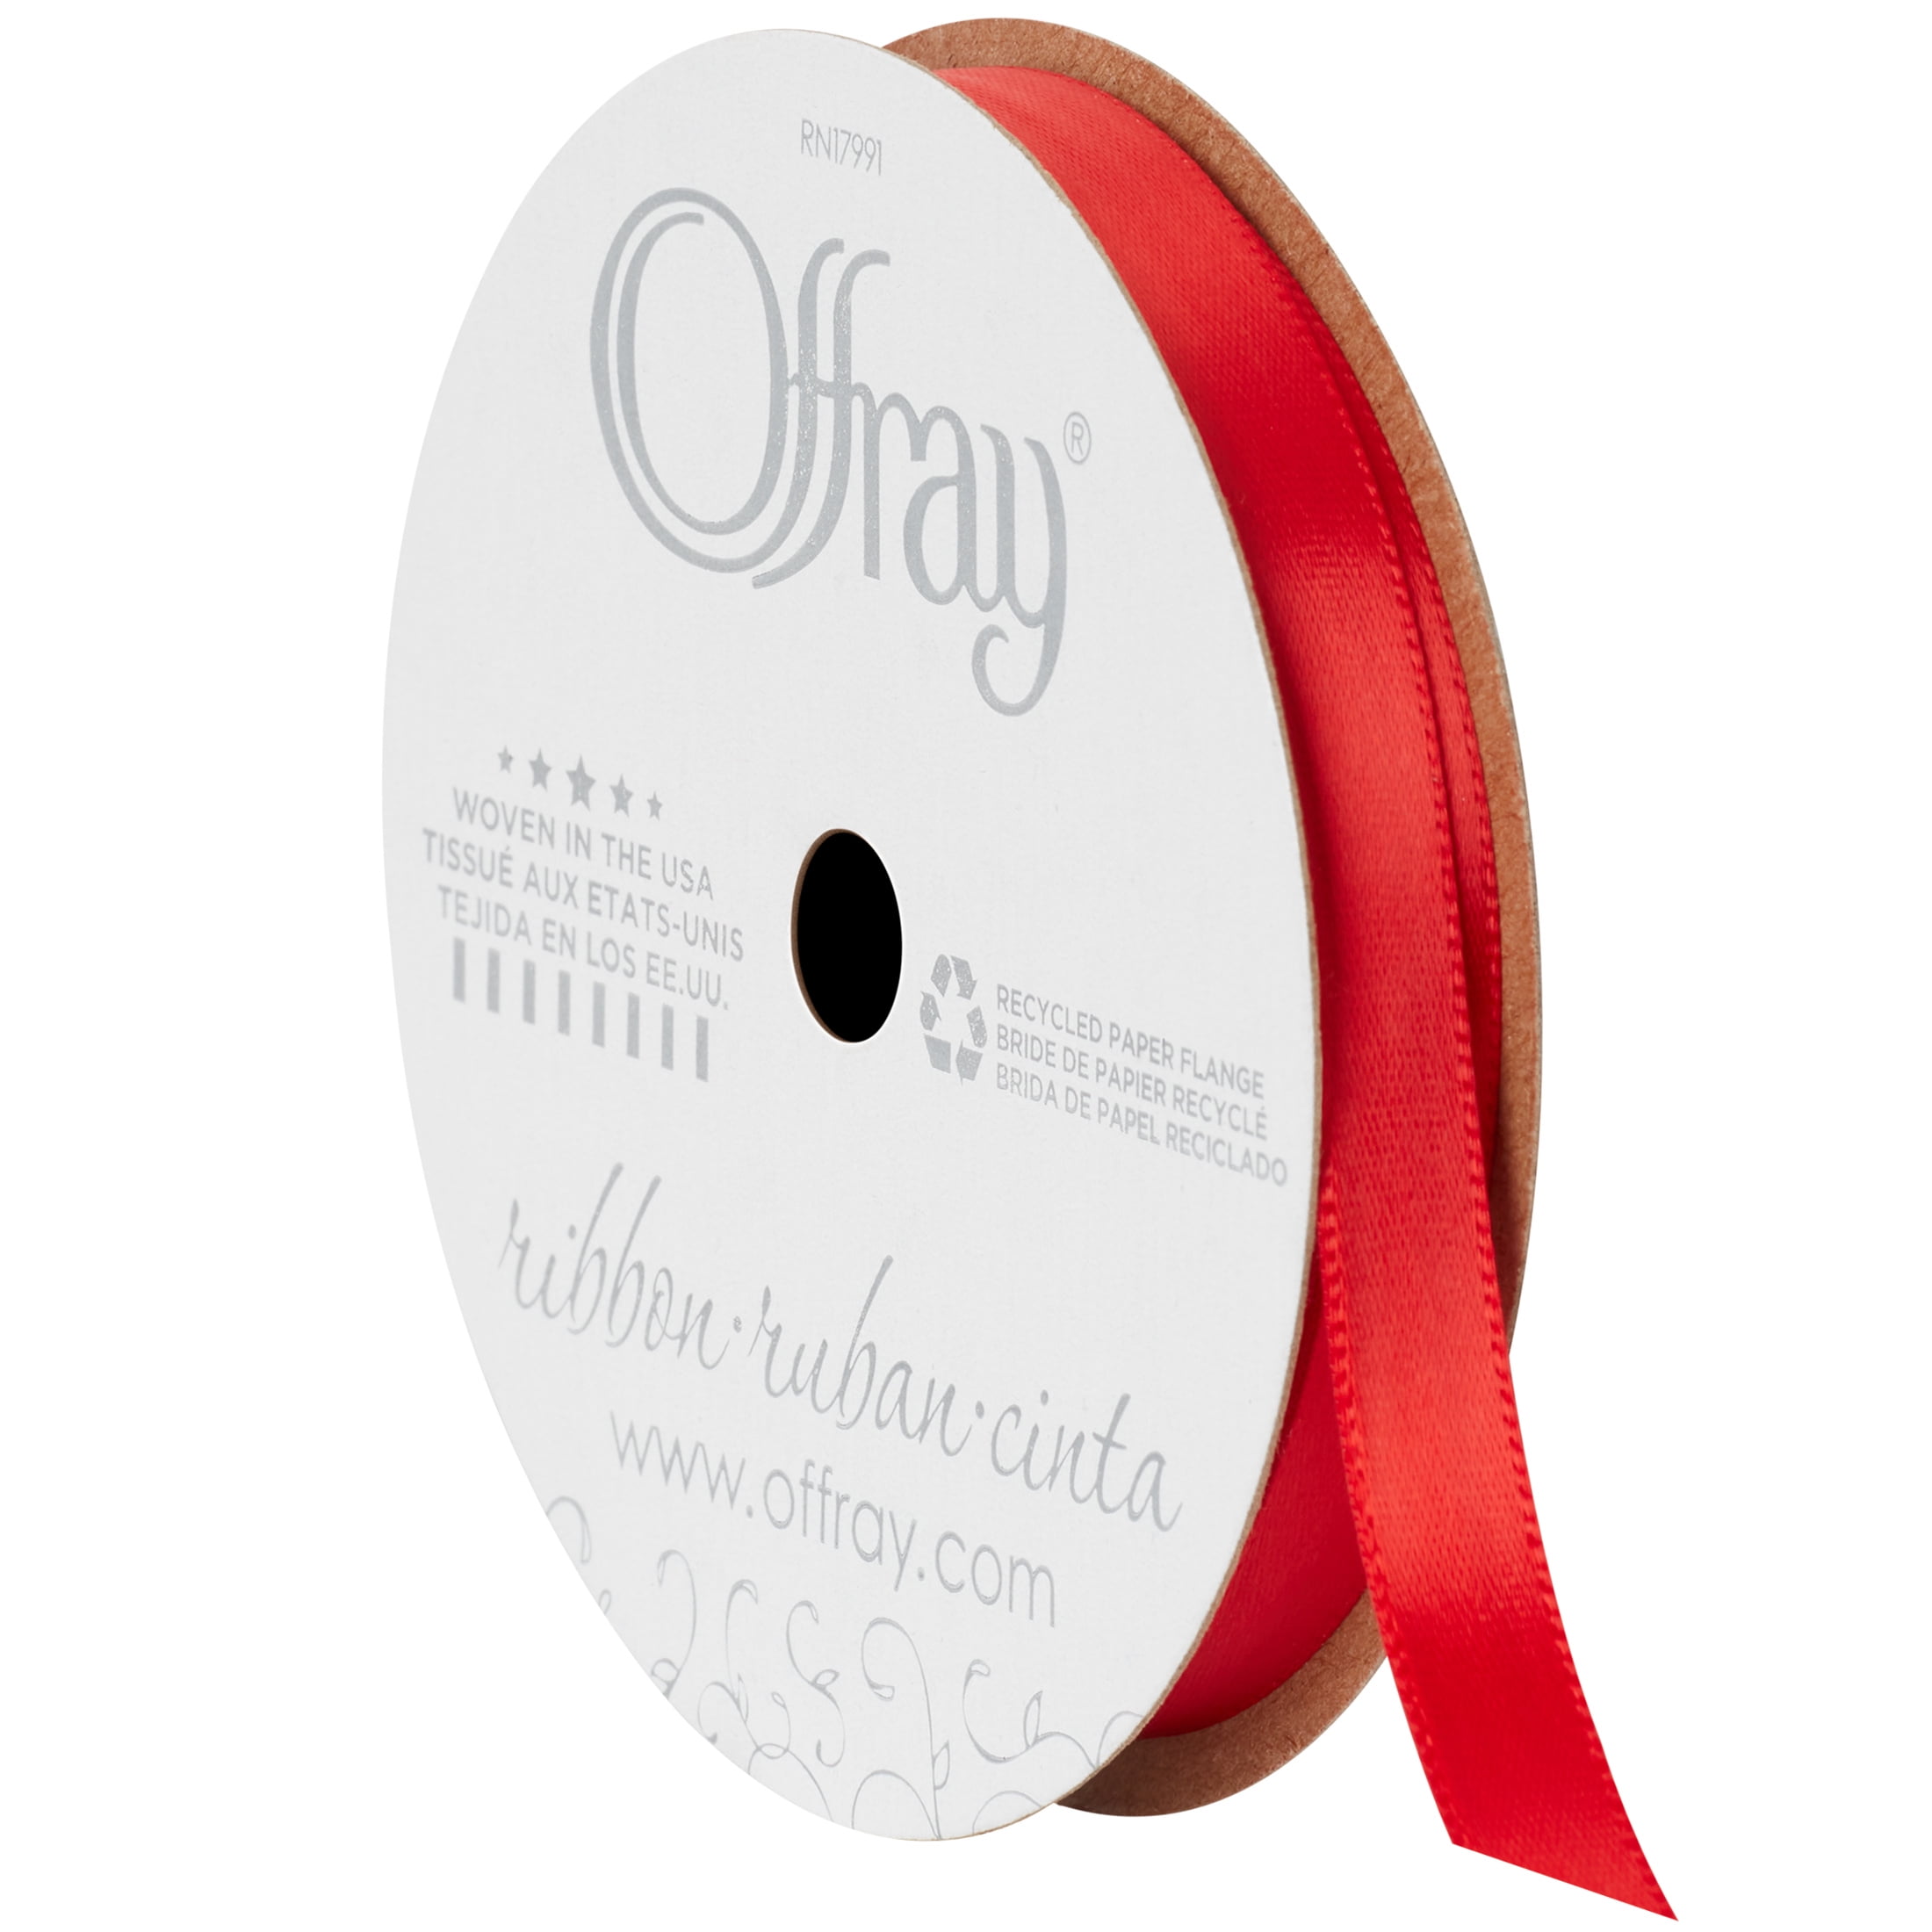 Offray Ribbon, Red 3/8 inch Single Face Satin Polyester Ribbon, 18 feet